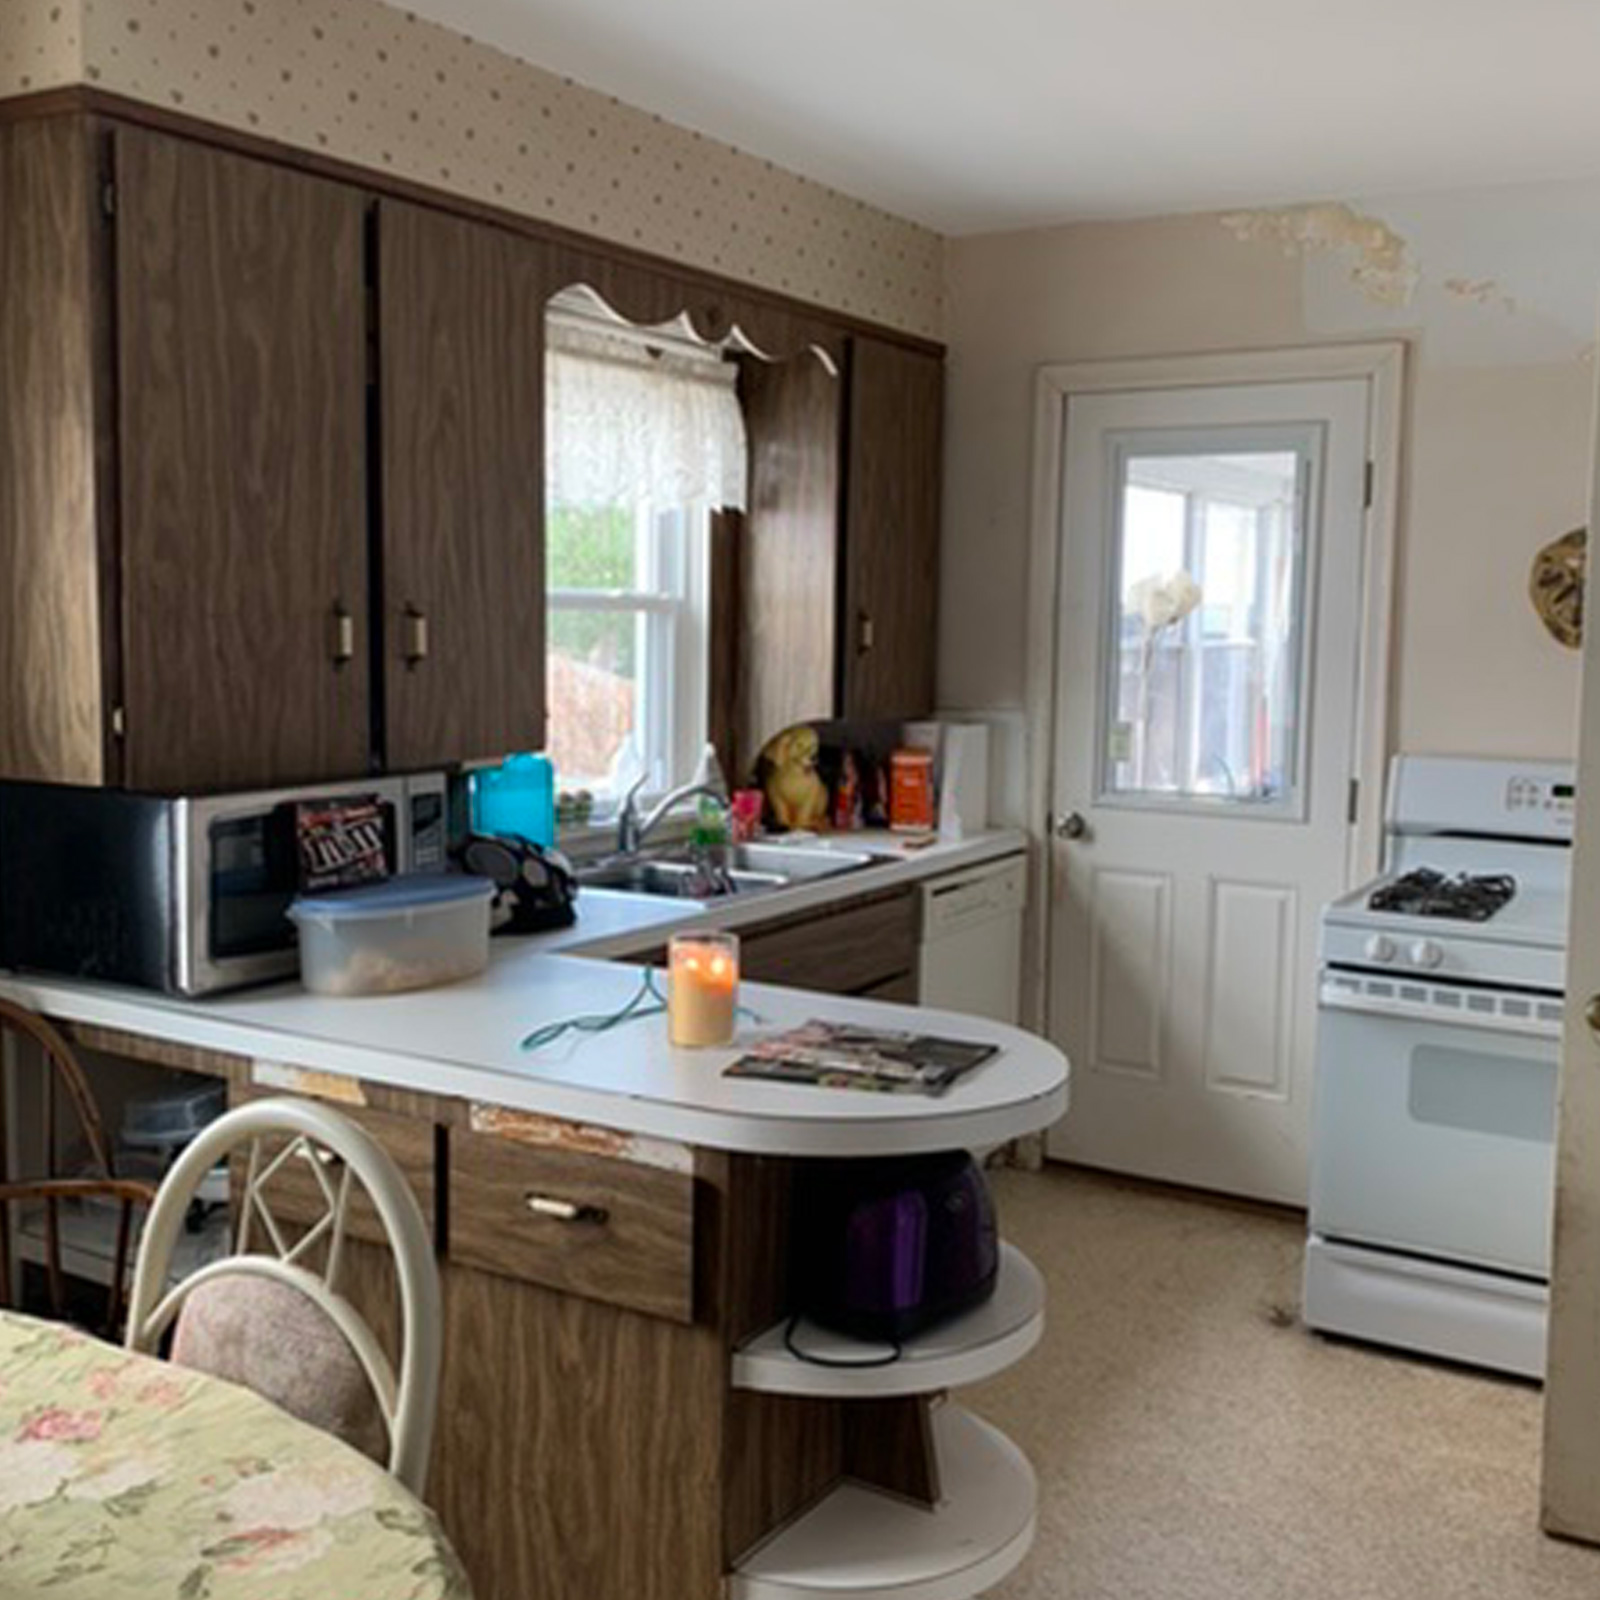 Entry 102 - This outdated kitchen could be transformed into a beautiful room